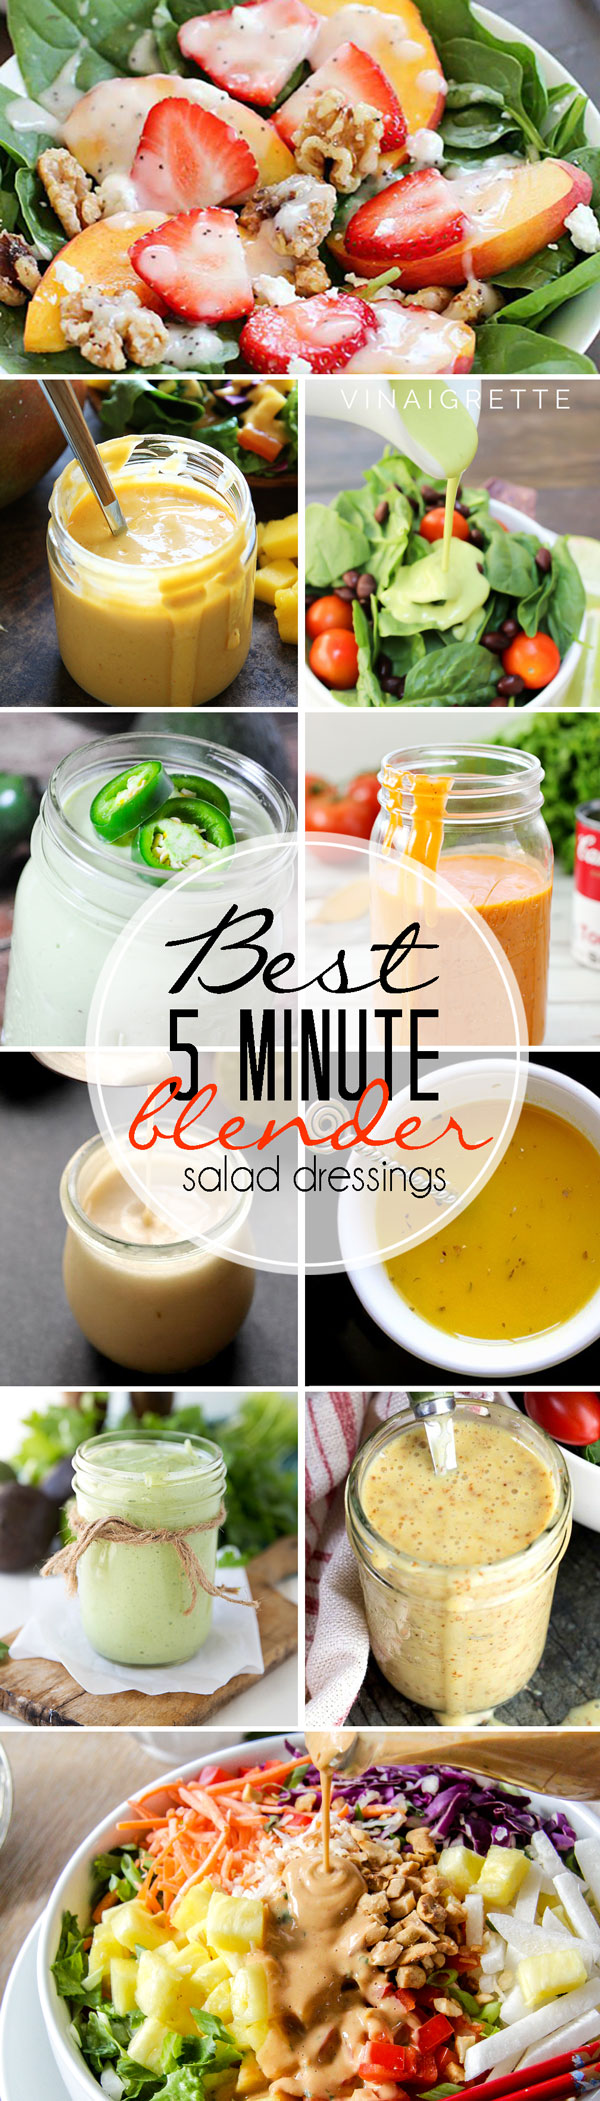 Easy 5 minute blender salad dressings, including the dressing recipe for a Creamy Jalapeno and Avocado Salad Dressing that's perfect for salads, burrito bowls, and chicken wraps! | The Love Nerds